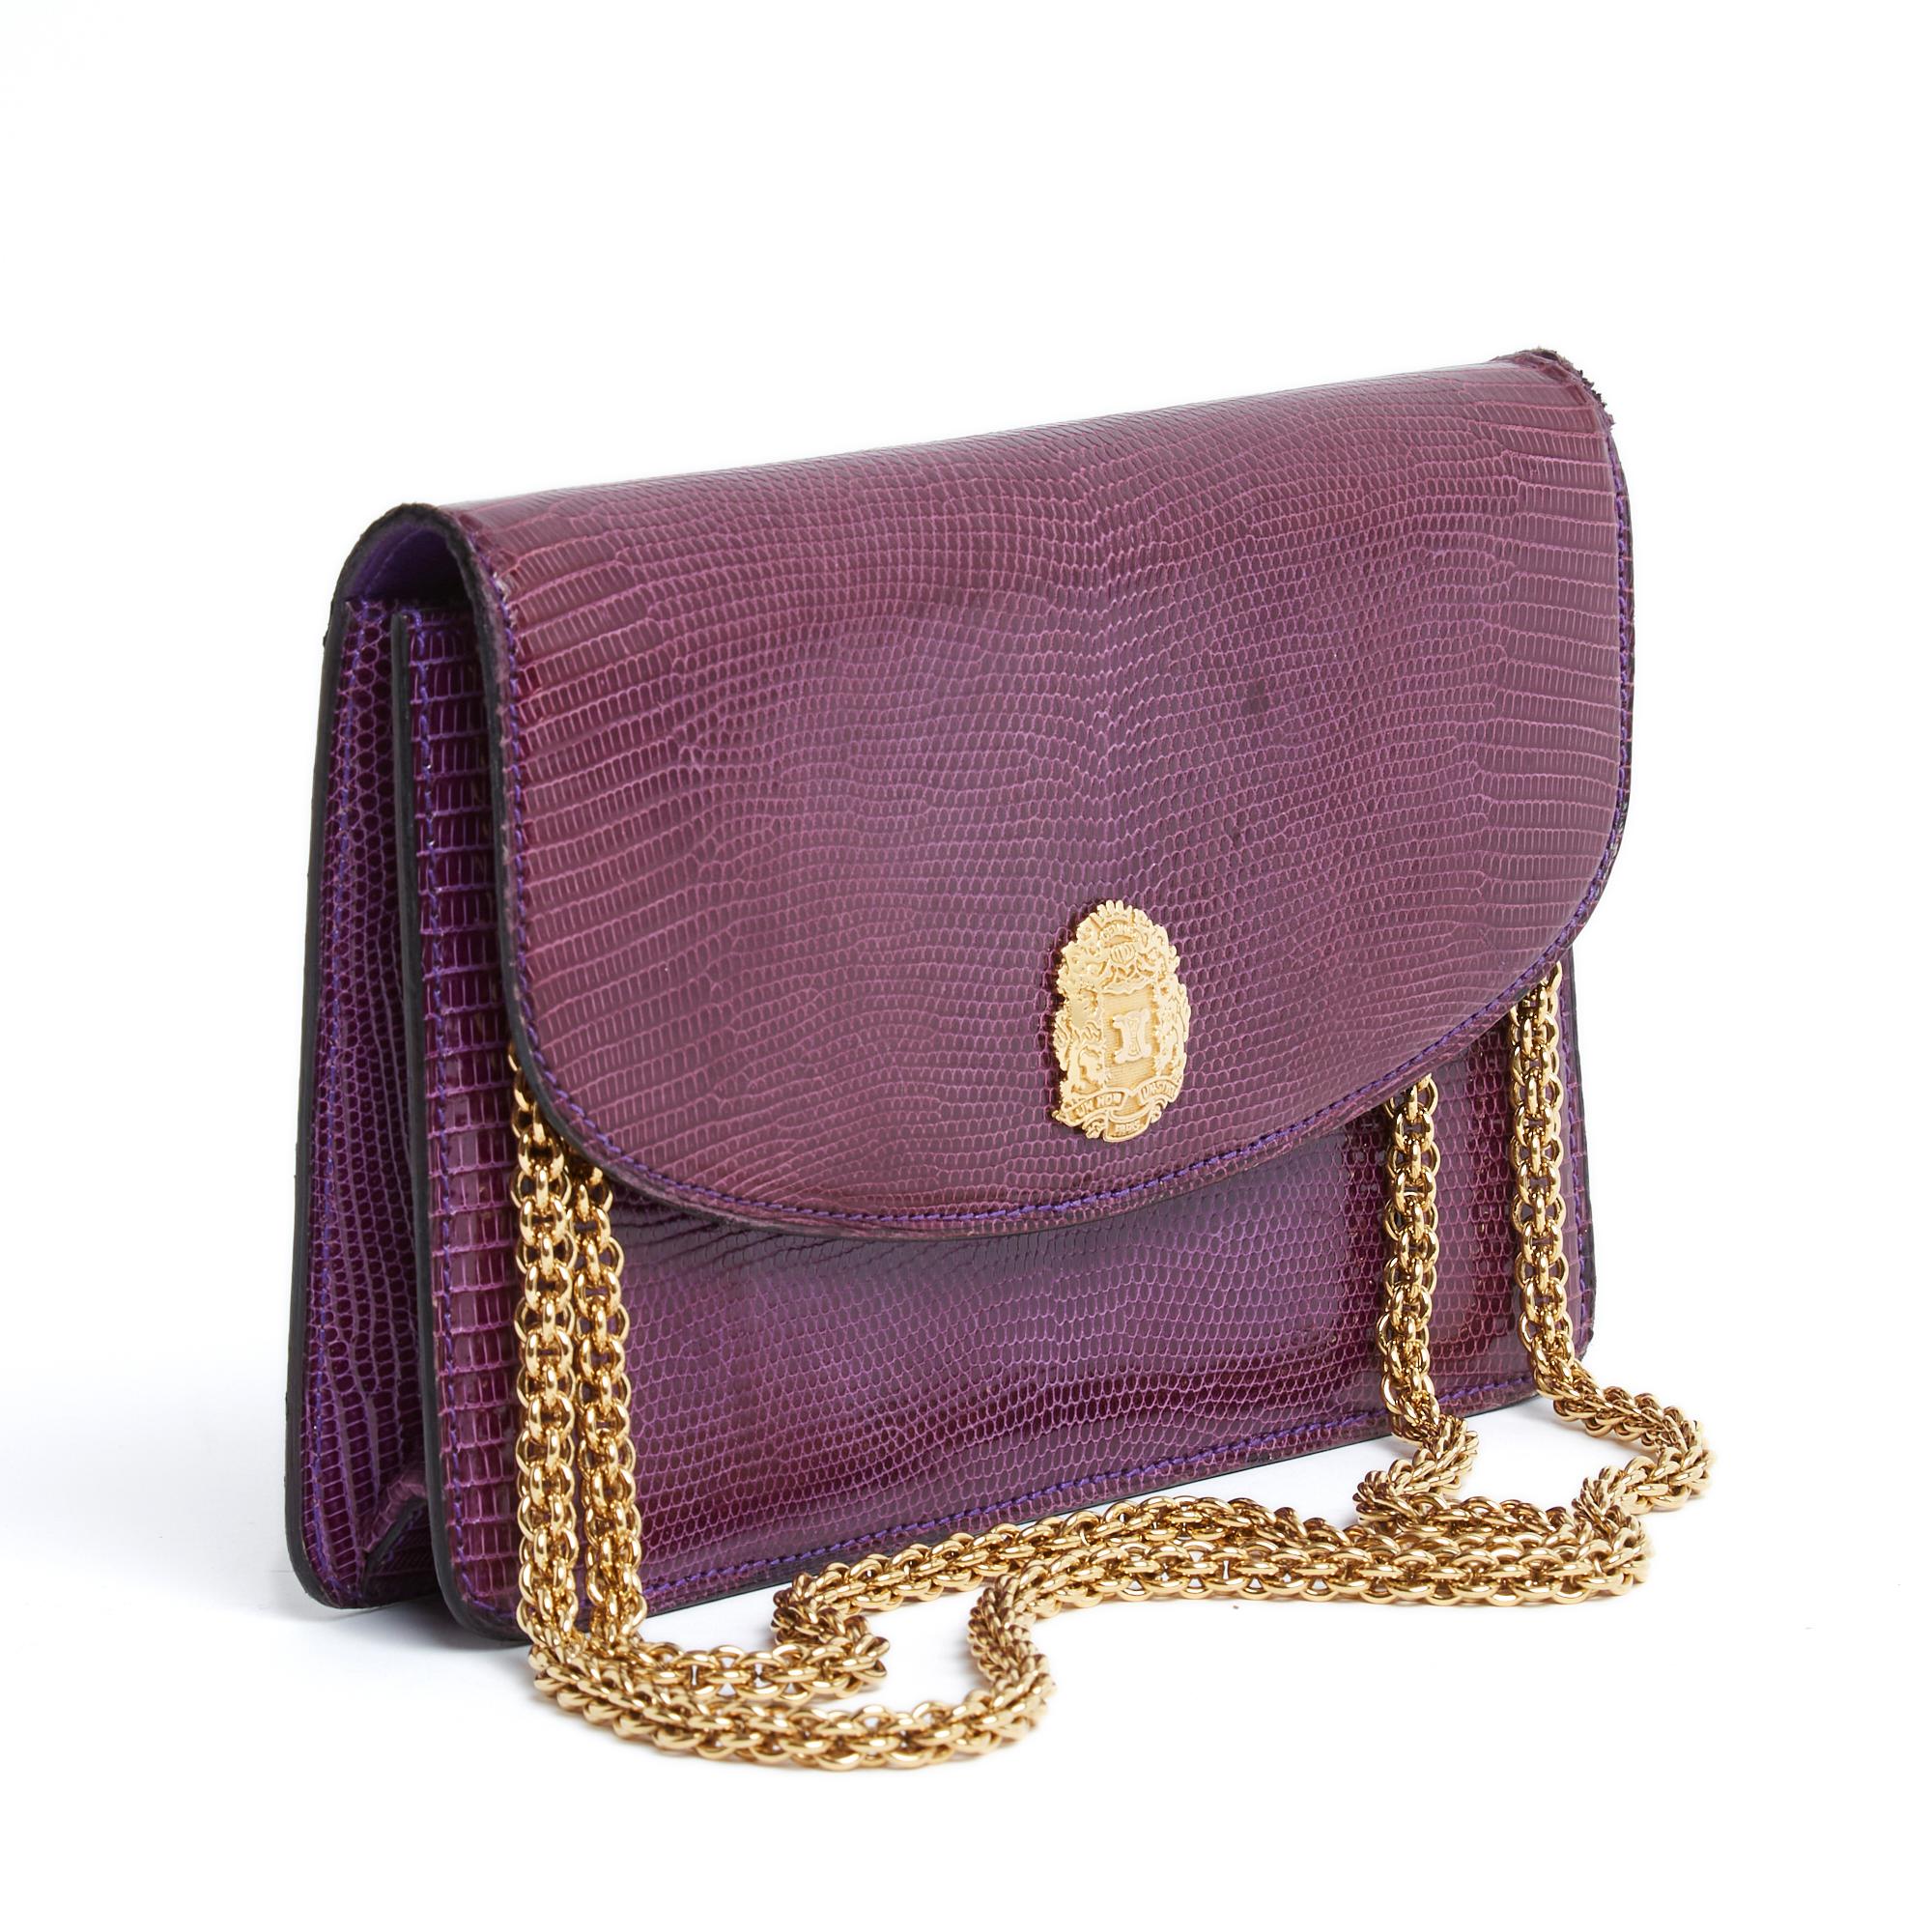 Céline bag or clutch circa 1990 in purple lizard leather, large flap closed with a snap under a gold metal piece with the Triomphe de Céline logo, interior in soft leather coordinated with a zipped pocket, removable gold metal chain (with logoed